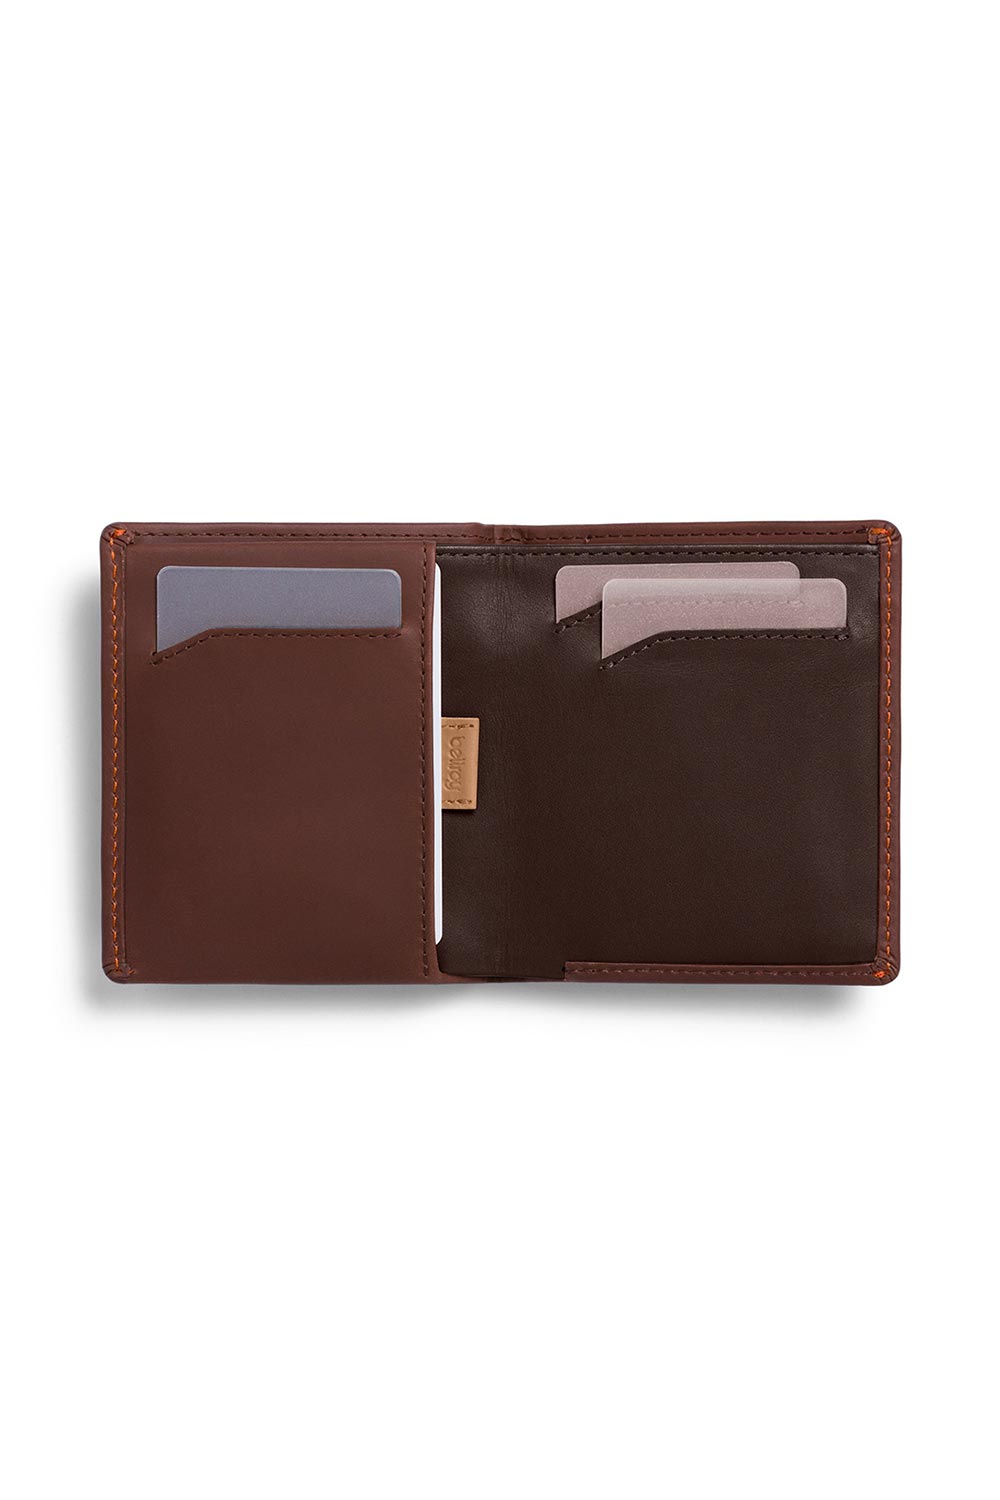 Bellroy - RFID Note Sleeve Wallet - Cocoa - Inside